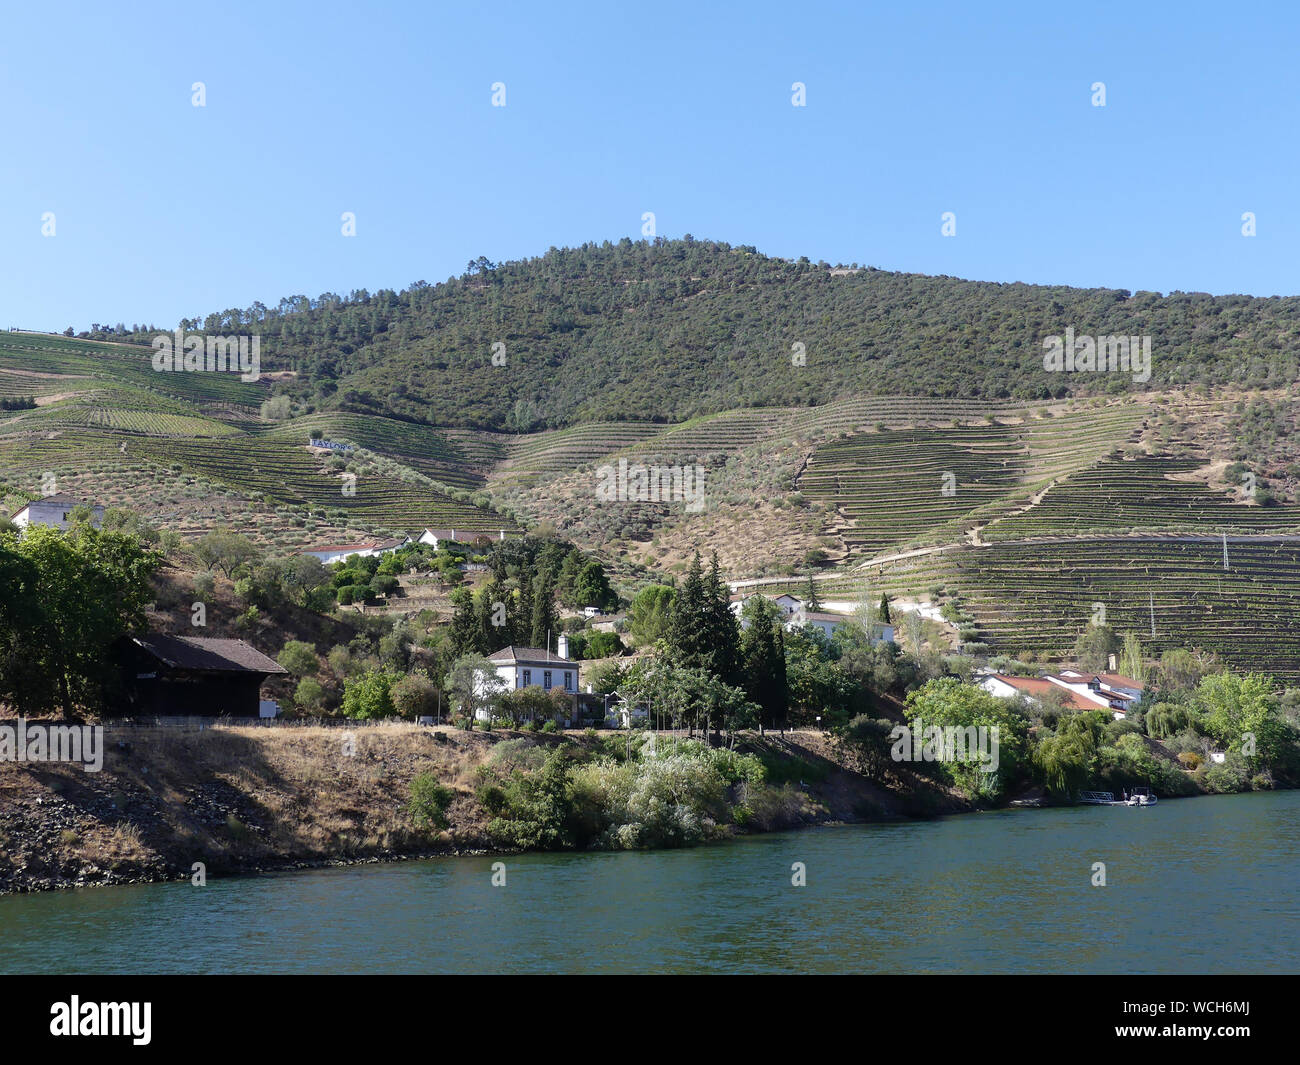 VINYARDS in the Douro River valley in Portugal. Photo: Tony Gale Stock Photo